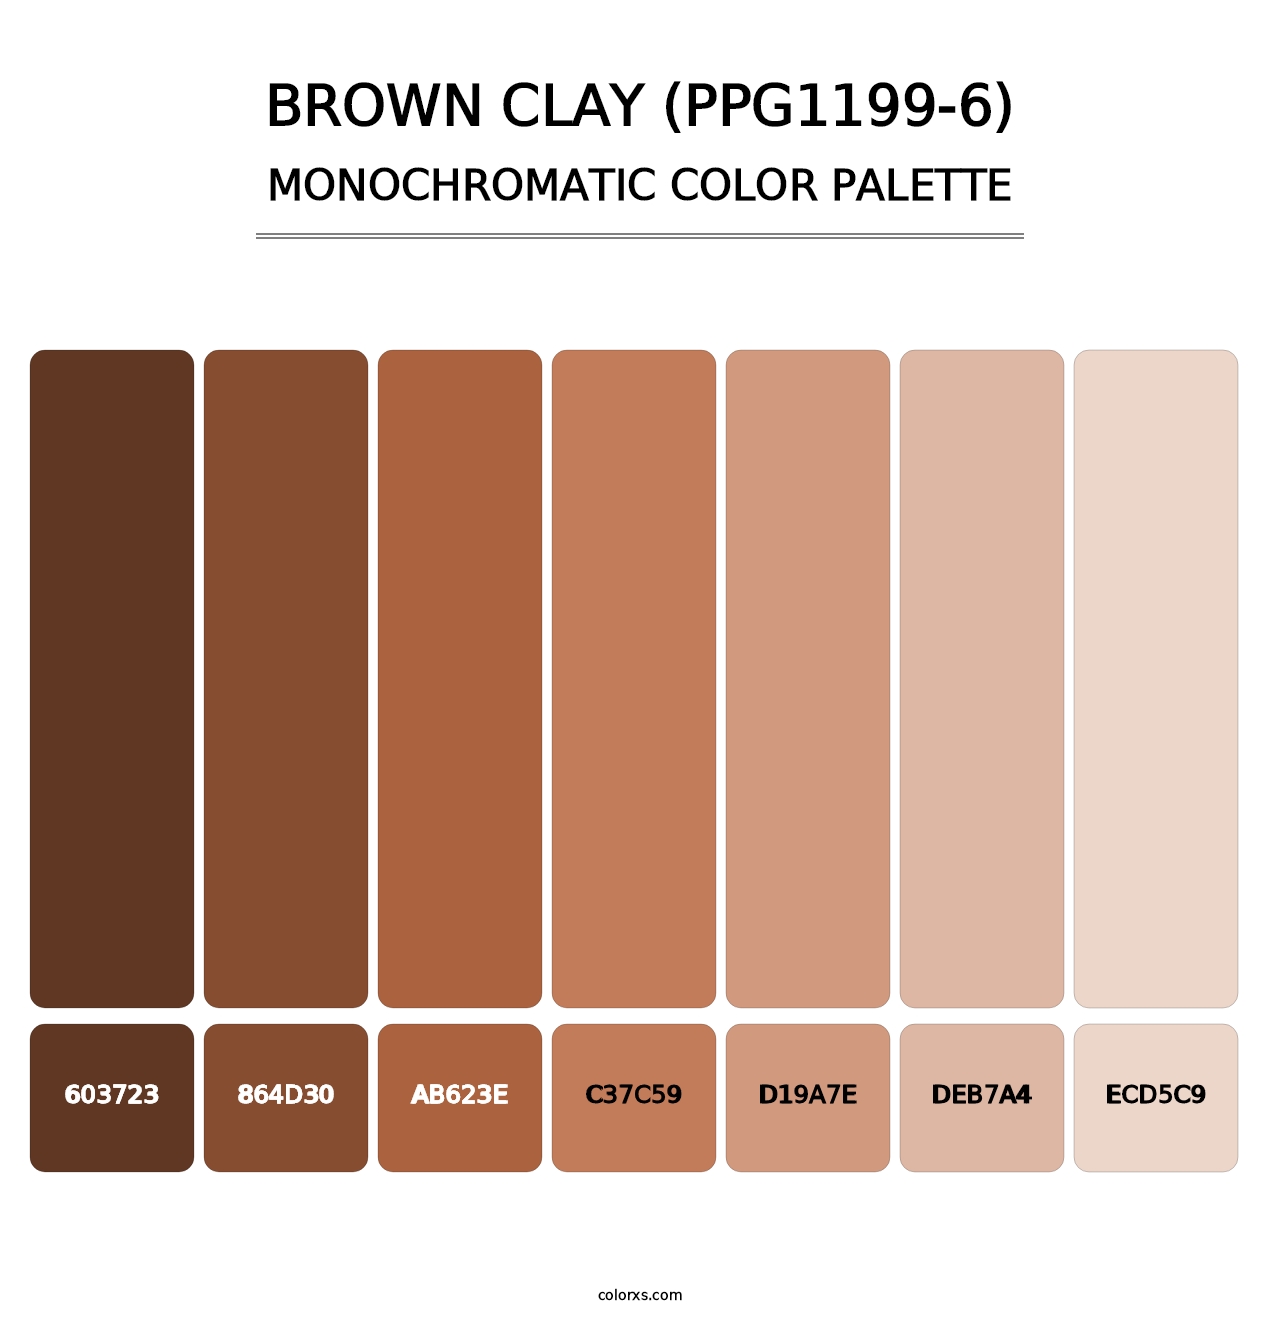 Brown Clay (PPG1199-6) - Monochromatic Color Palette